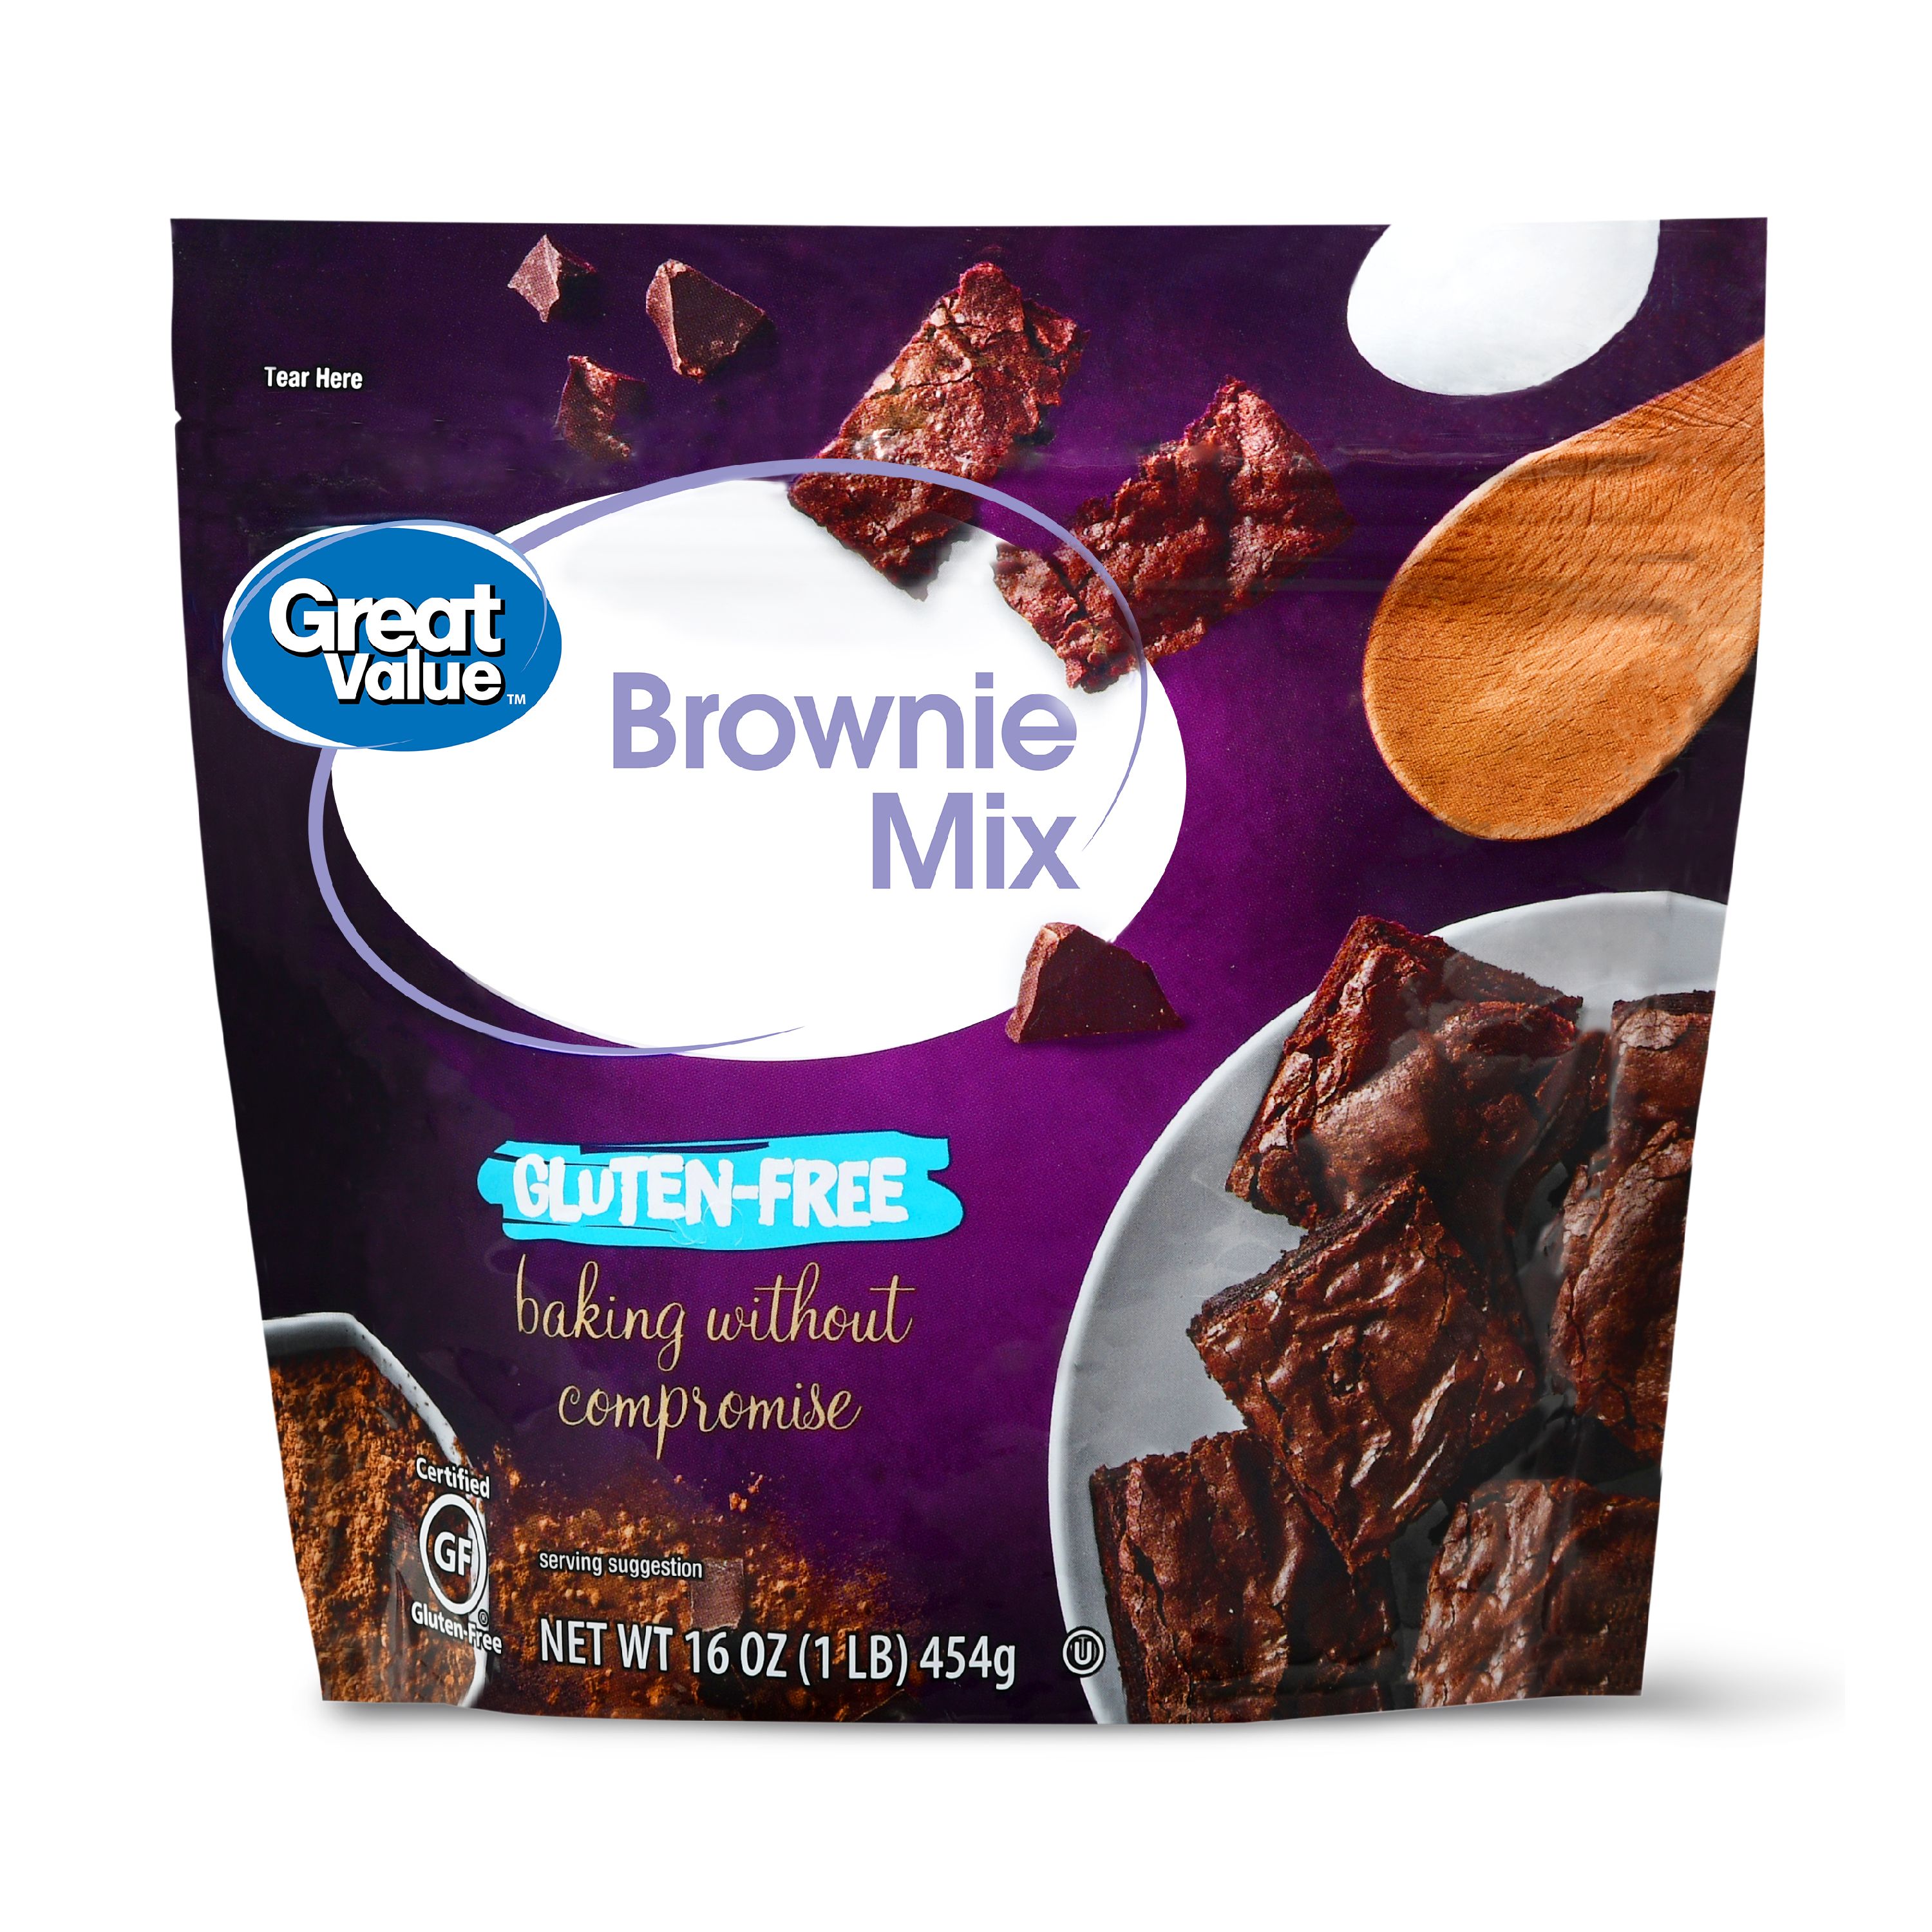 (2 Pack) Great Value Gluten-Free Brownie Mix, 16 Oz